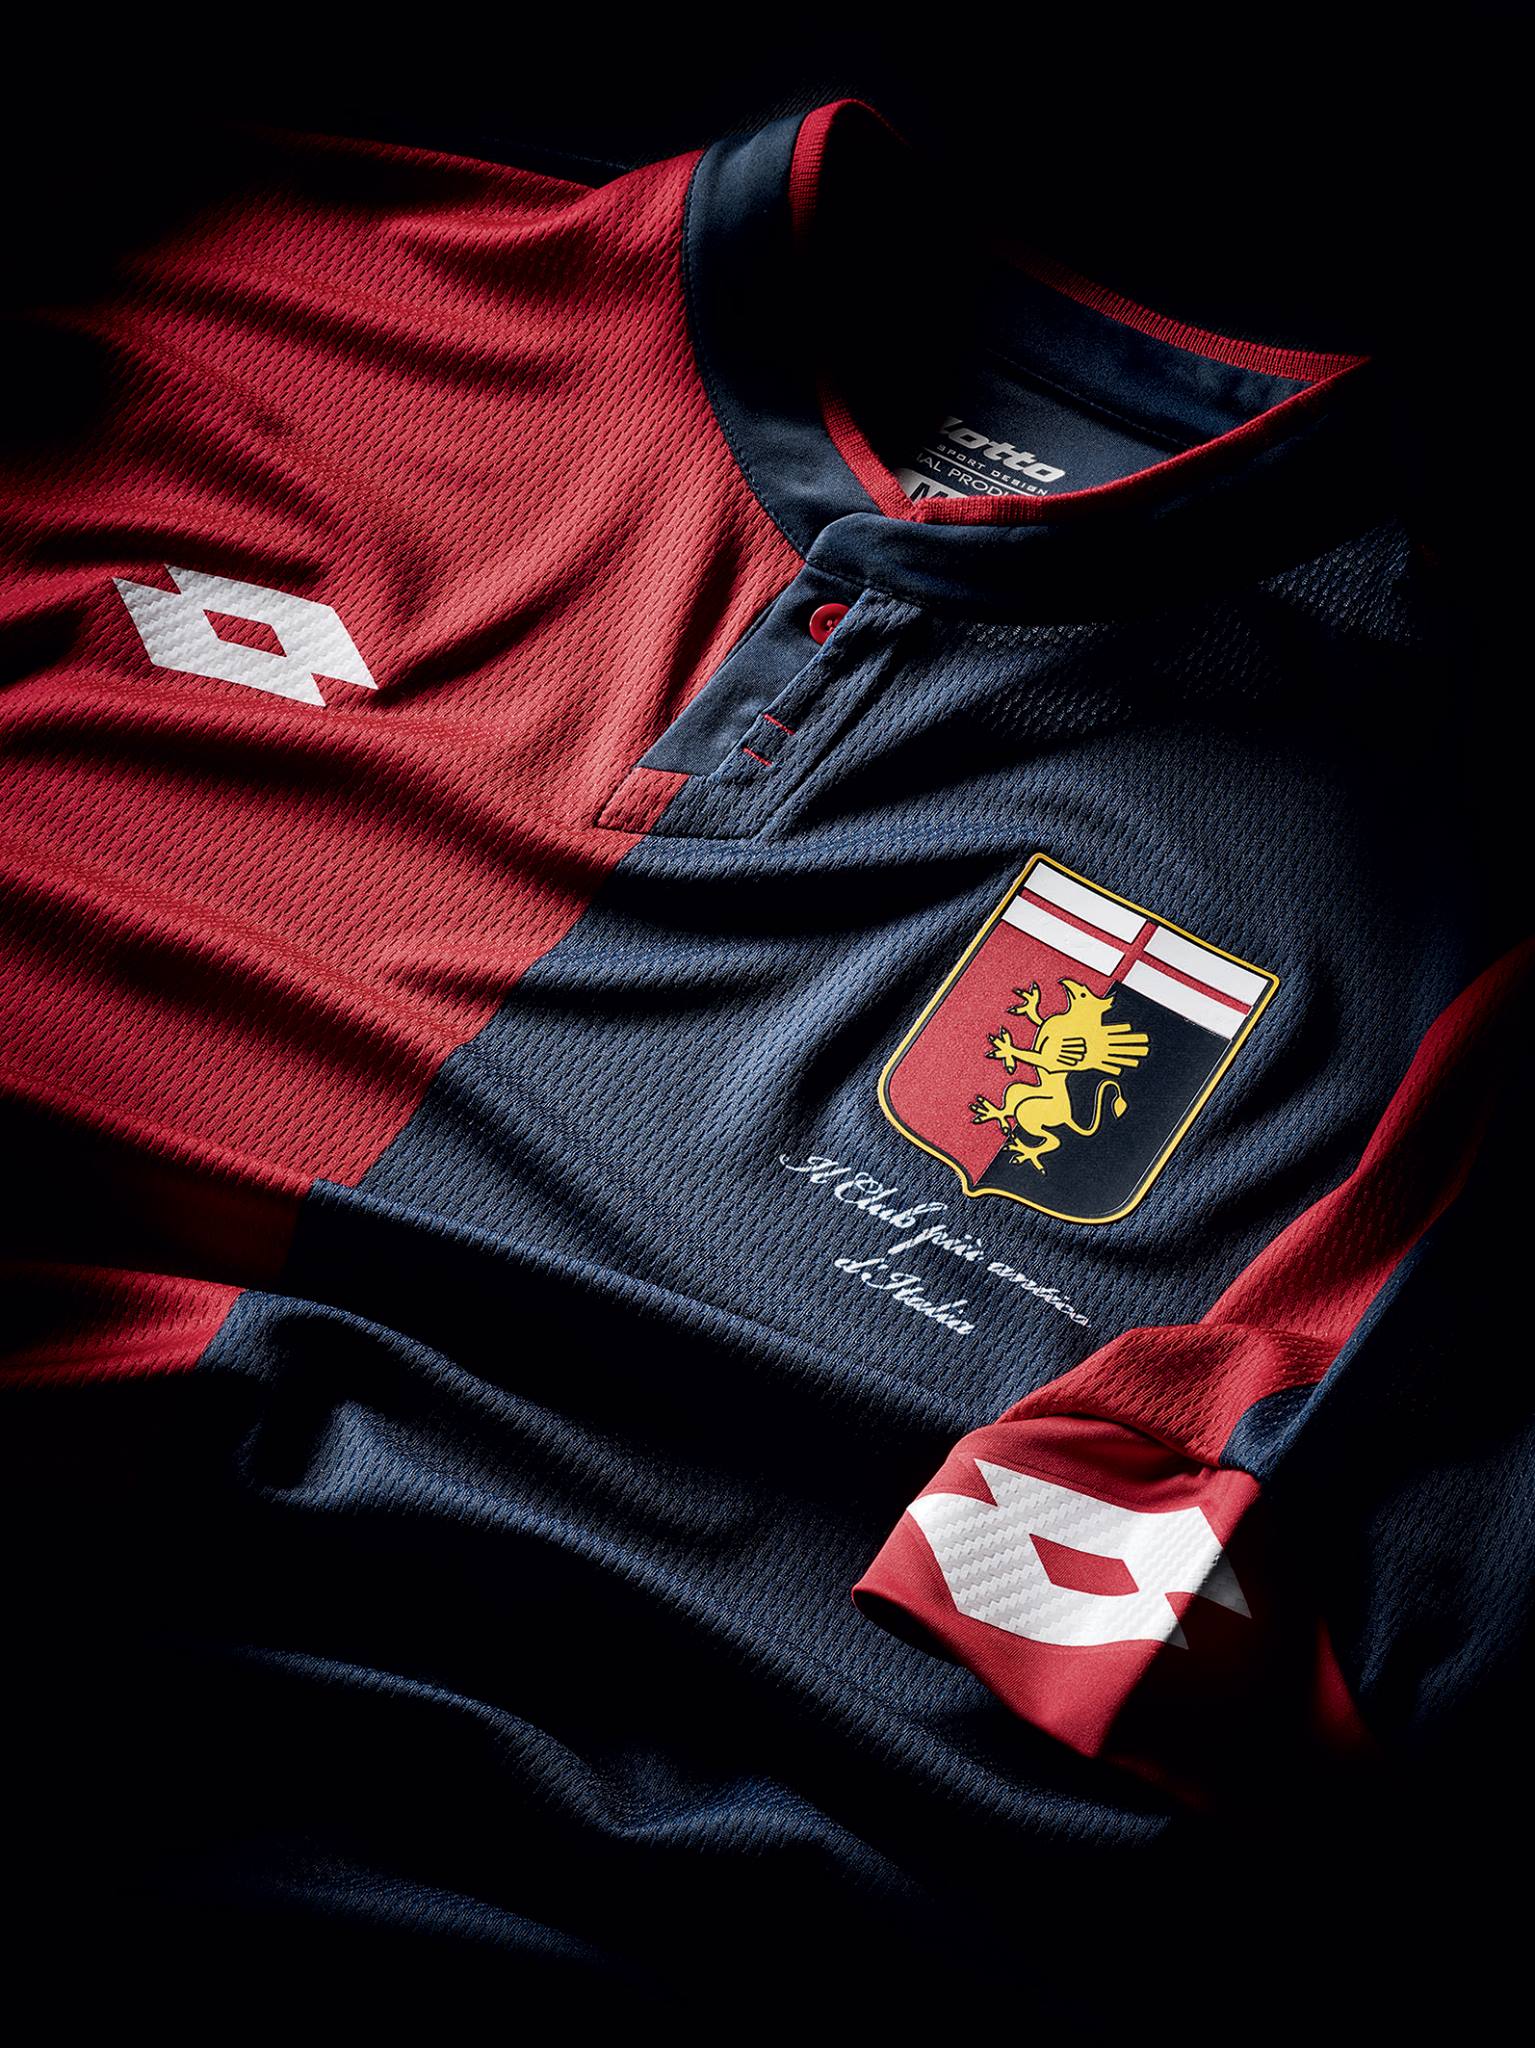 Genoa 2017 18 Home Kit By Lotto